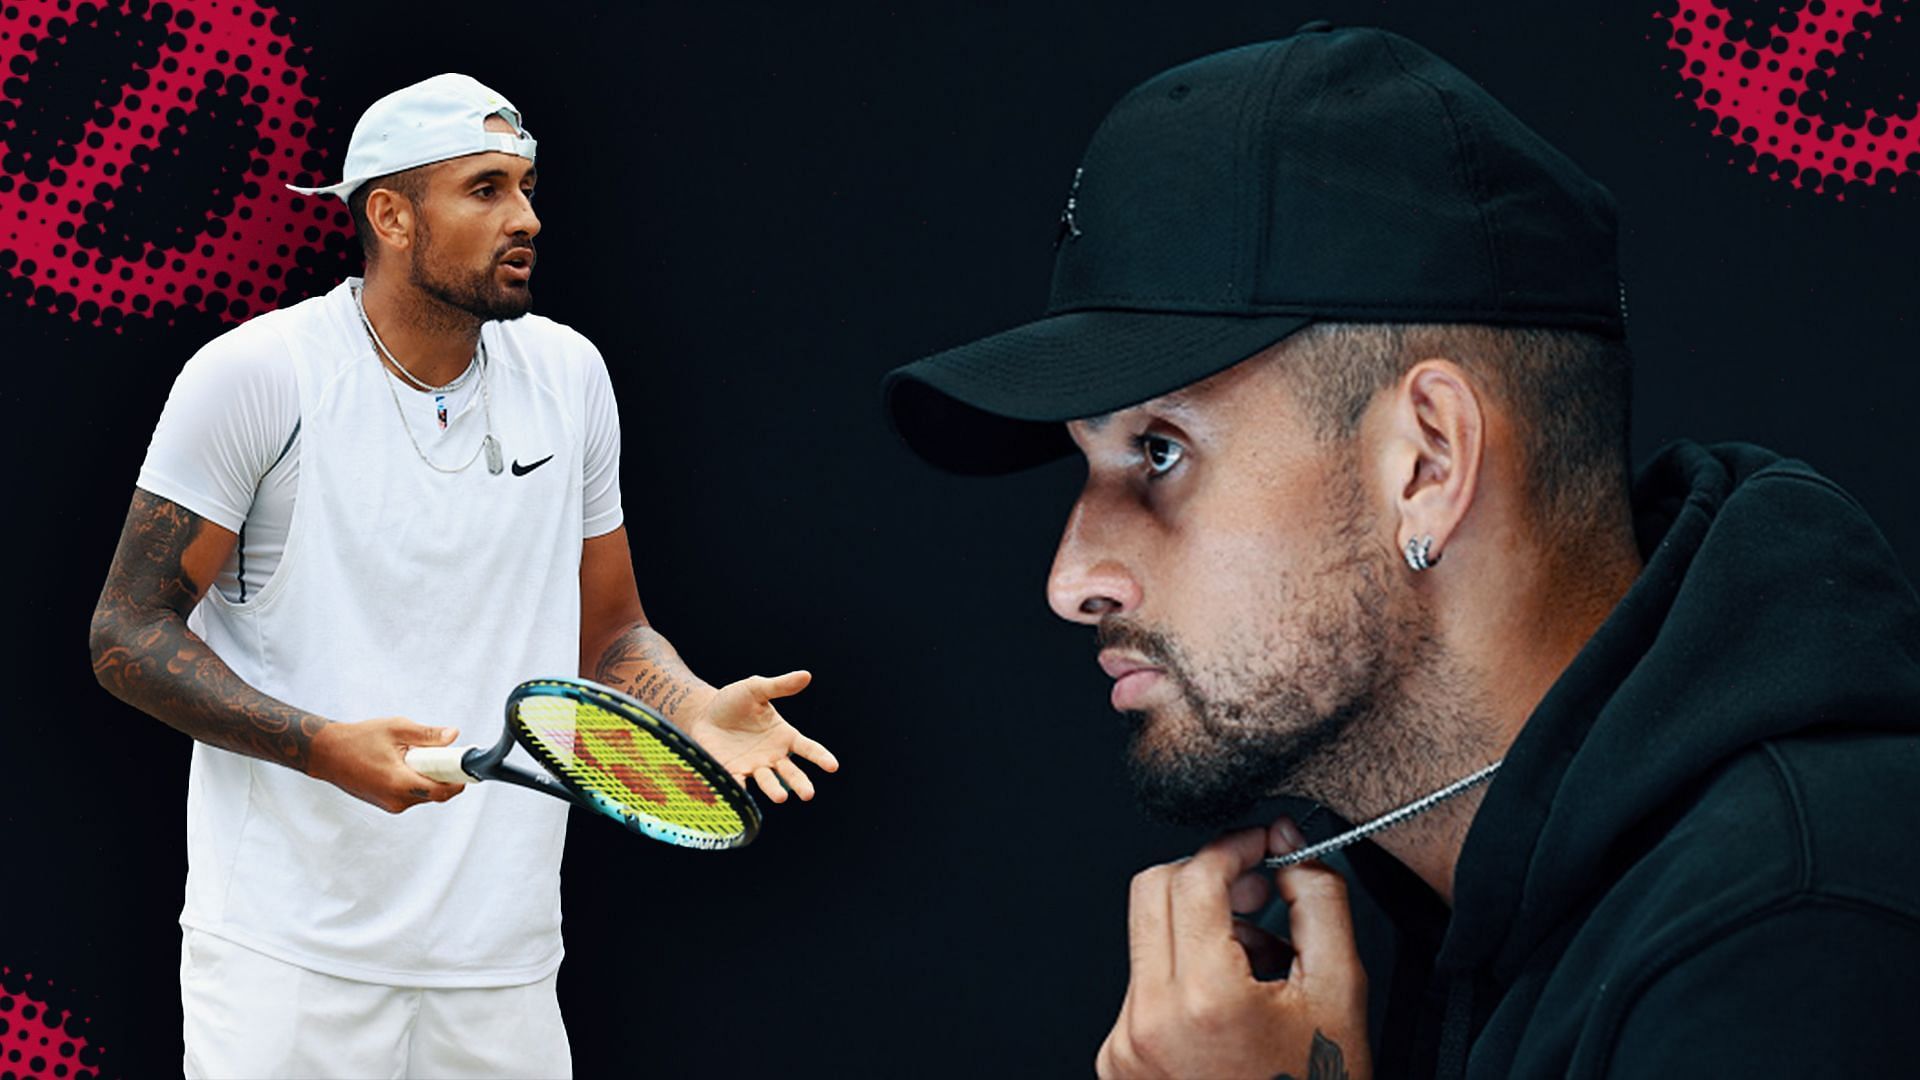 Nick Kyrgios is currently ranked No. 19 in the ATP singles rankings 